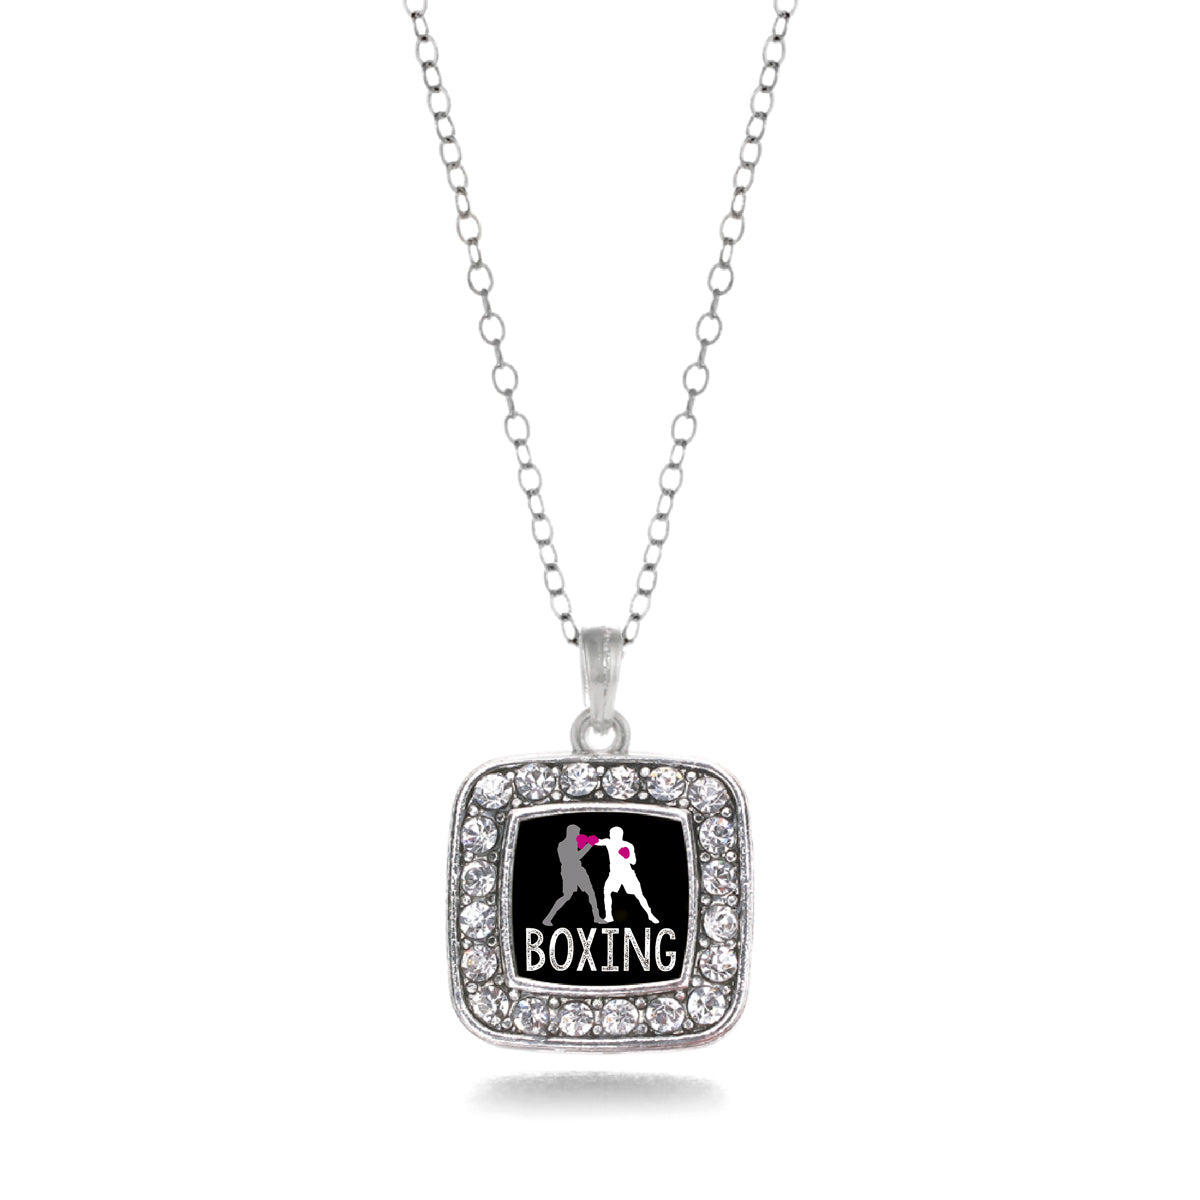 Silver Boxing Square Charm Classic Necklace